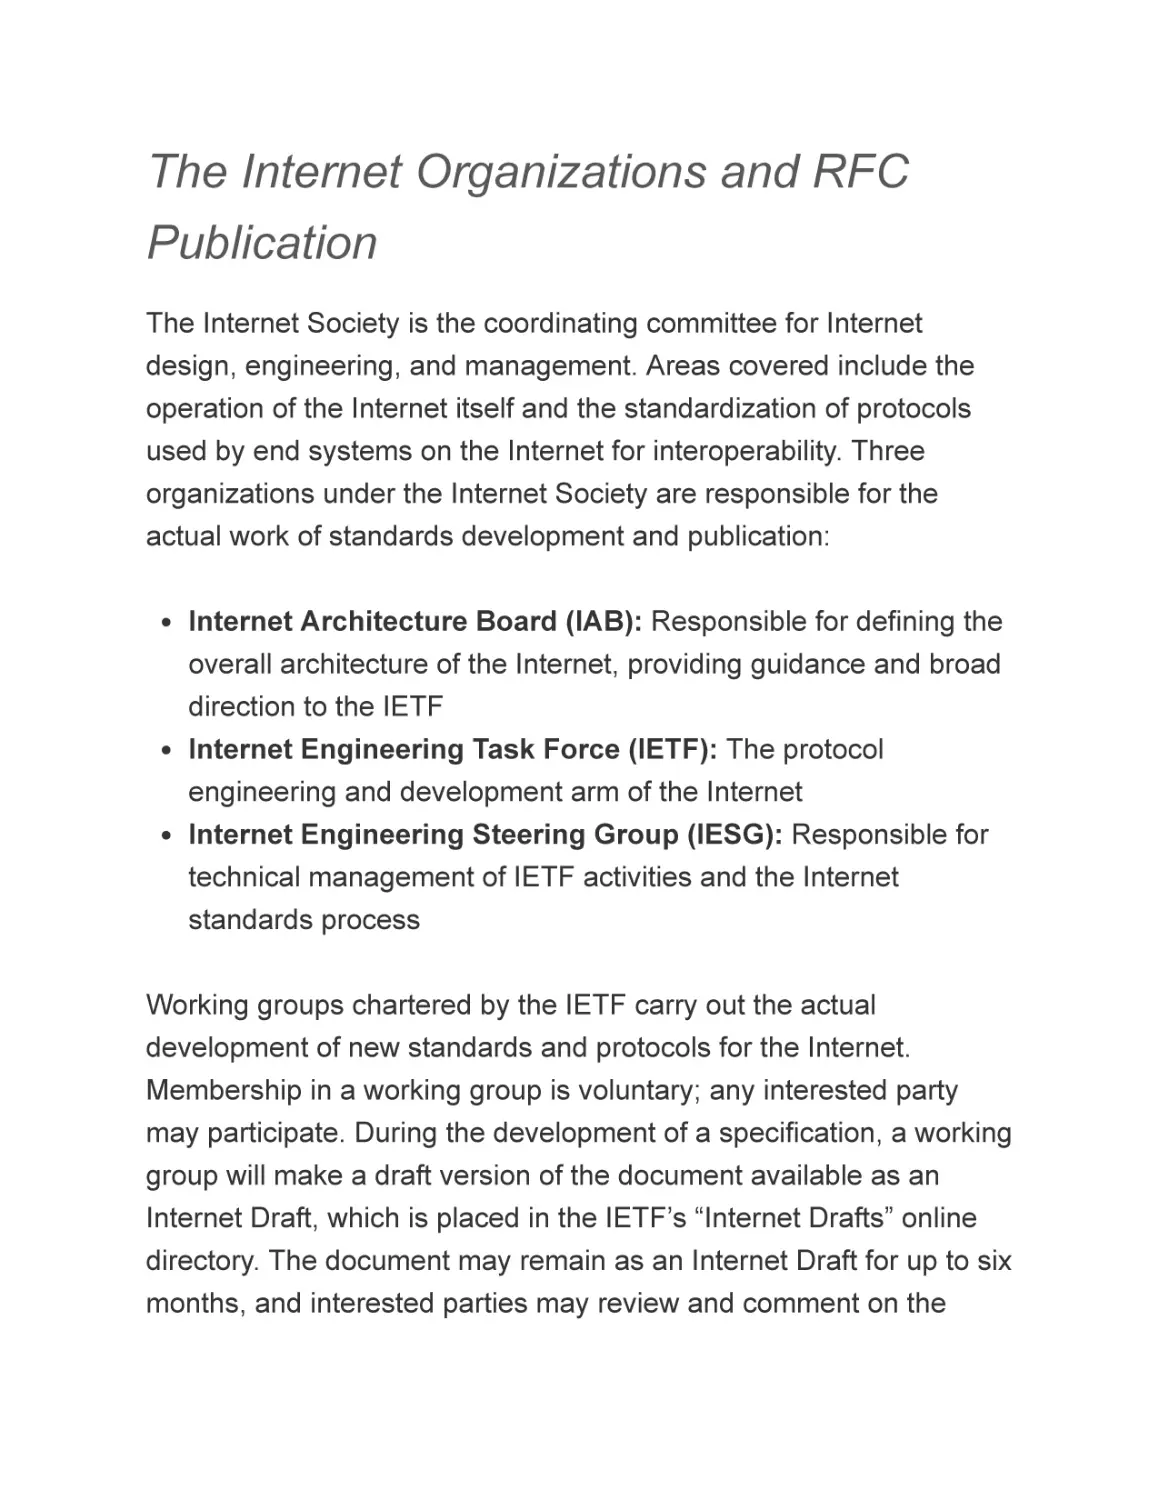 The Internet Organizations and RFC Publication